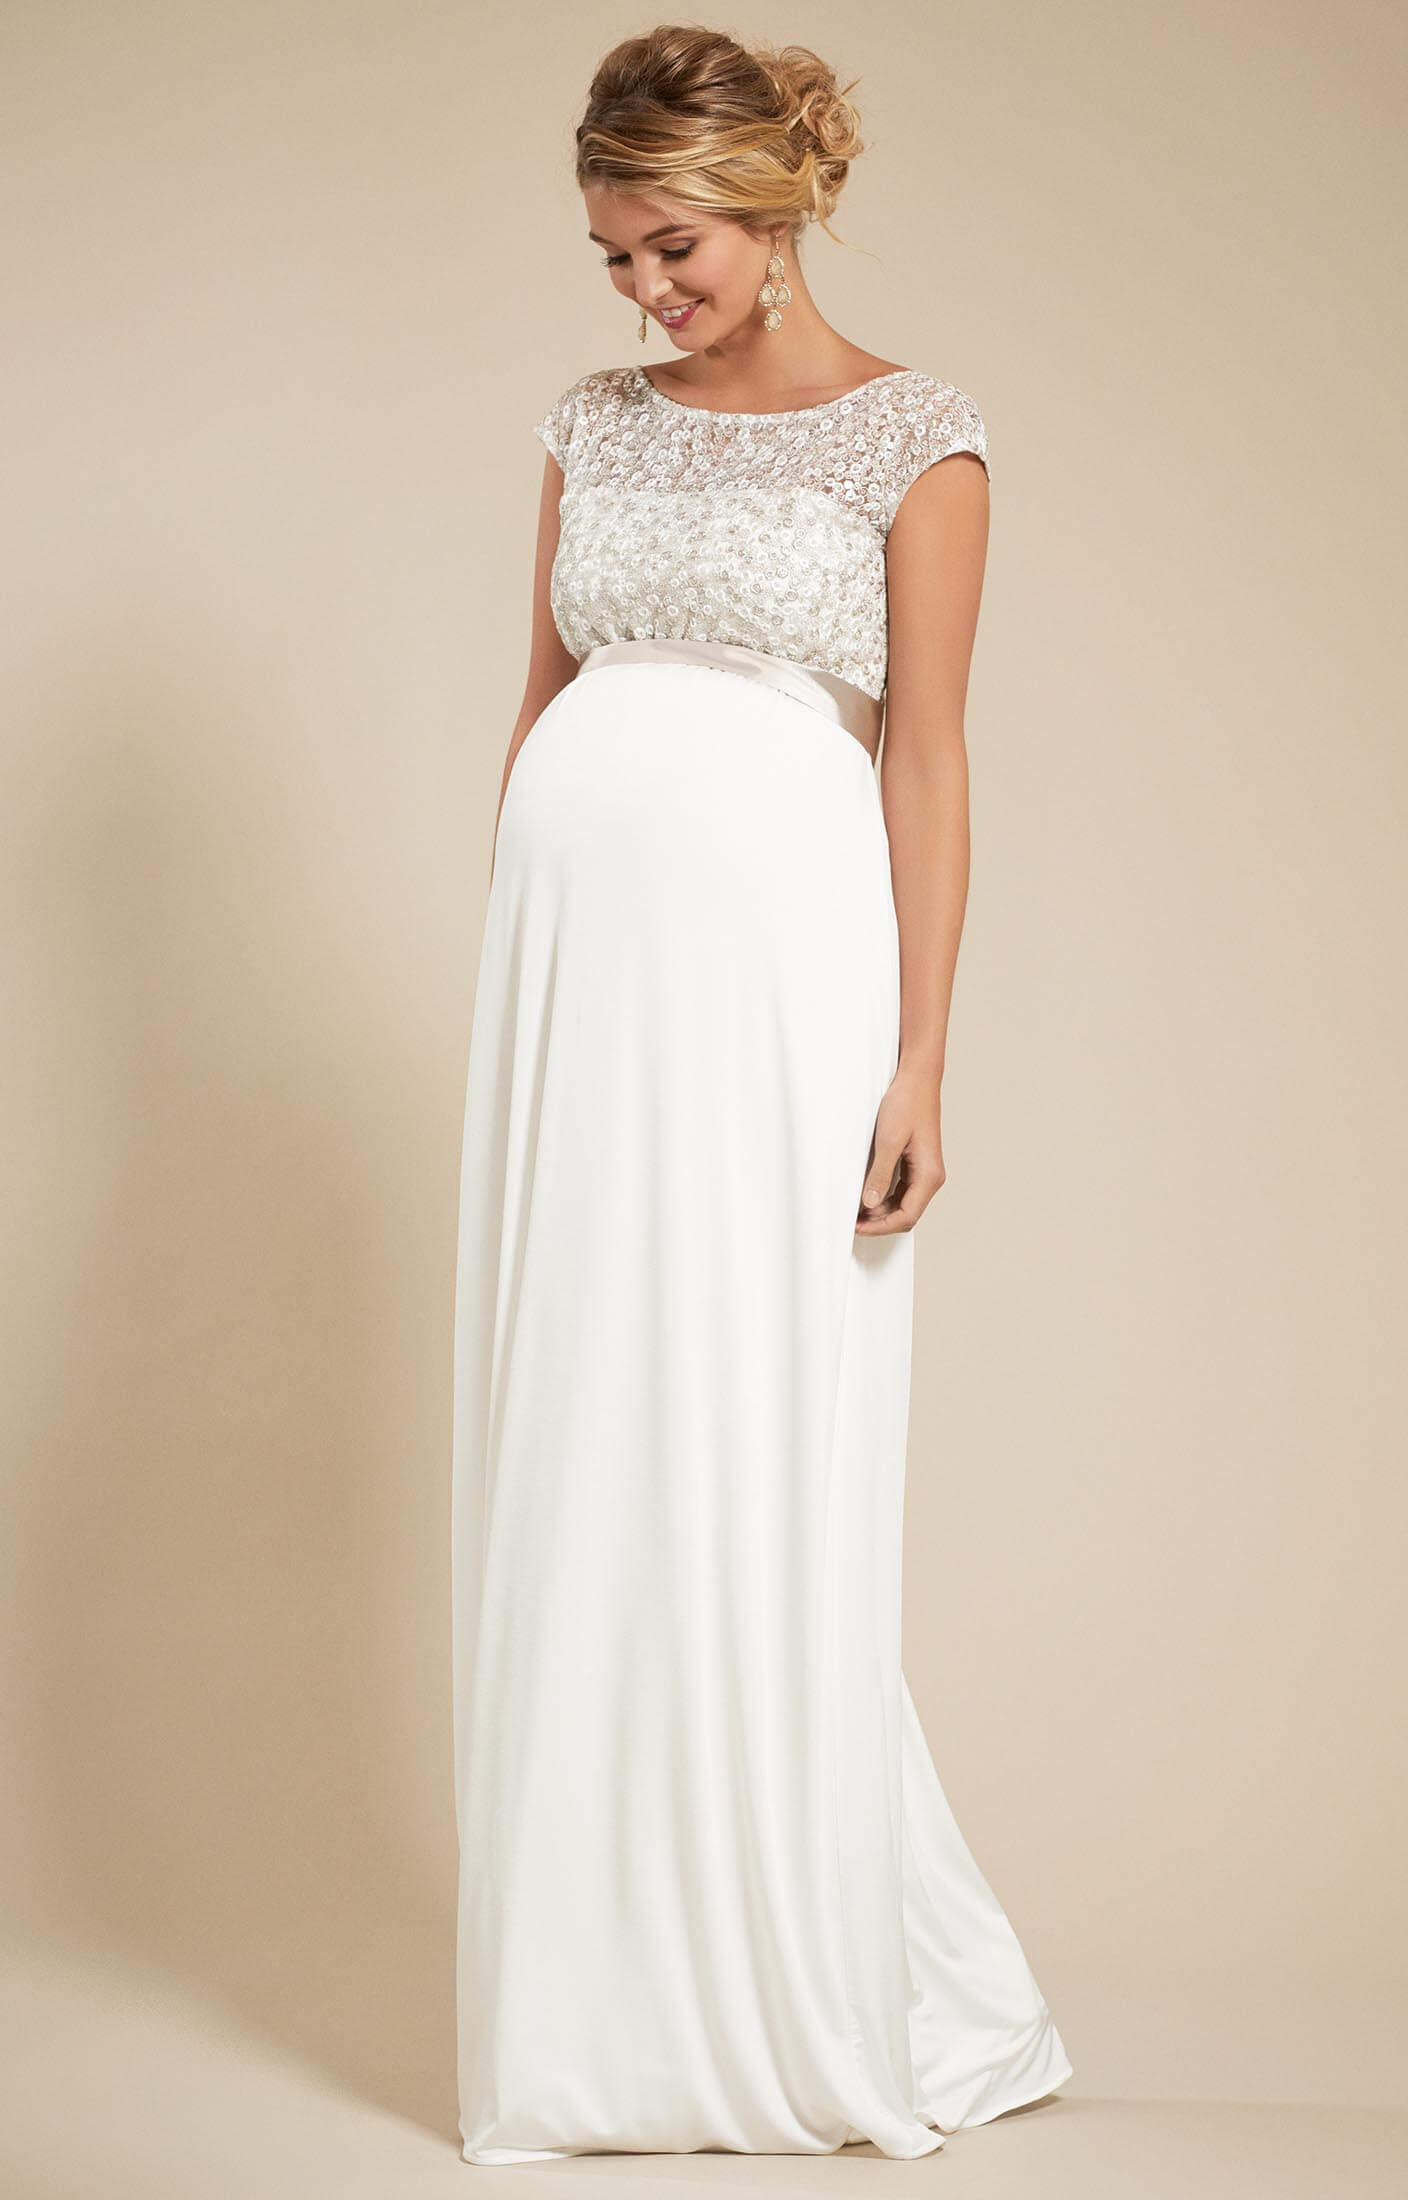 Mia Maternity Wedding Gown in Ivory - Maternity Wedding Dresses ...